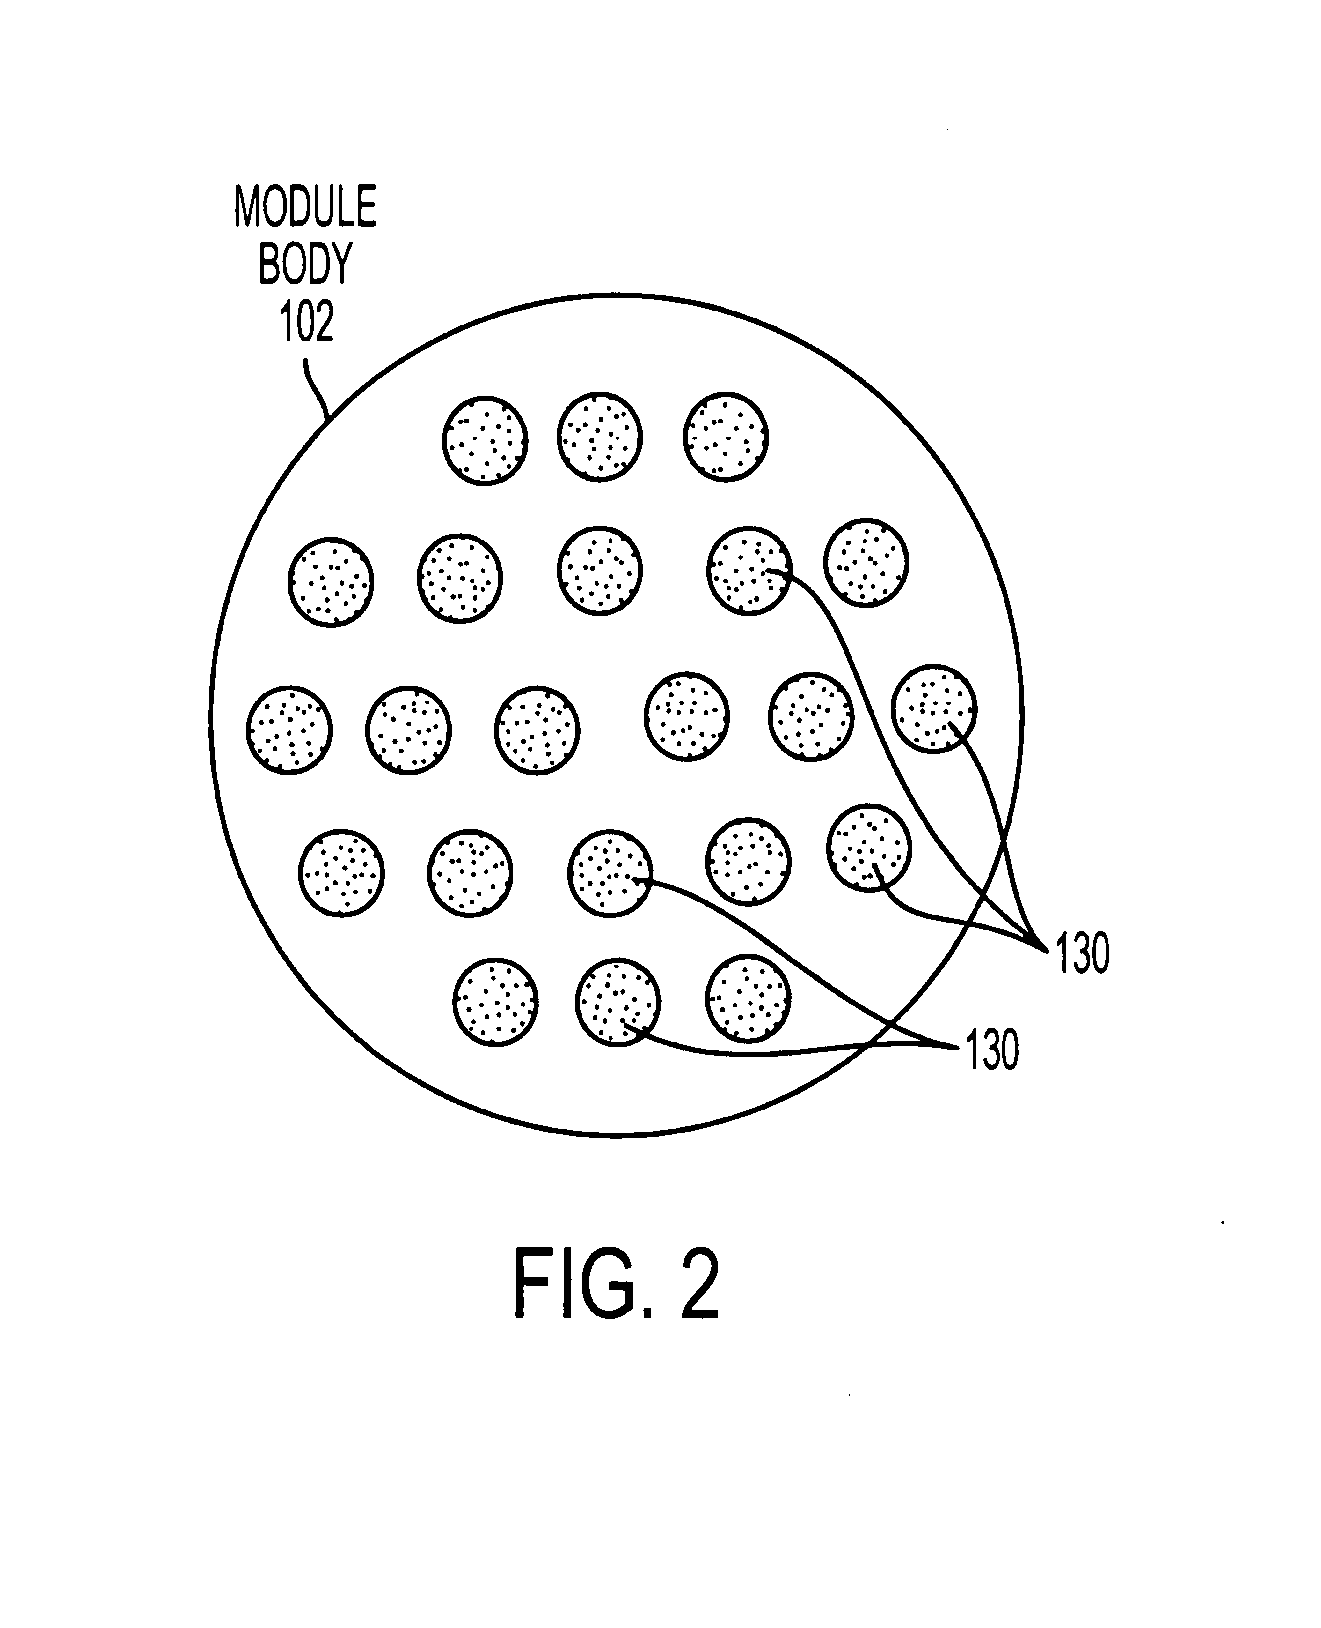 Apparatus and Method for Filtering Fluids